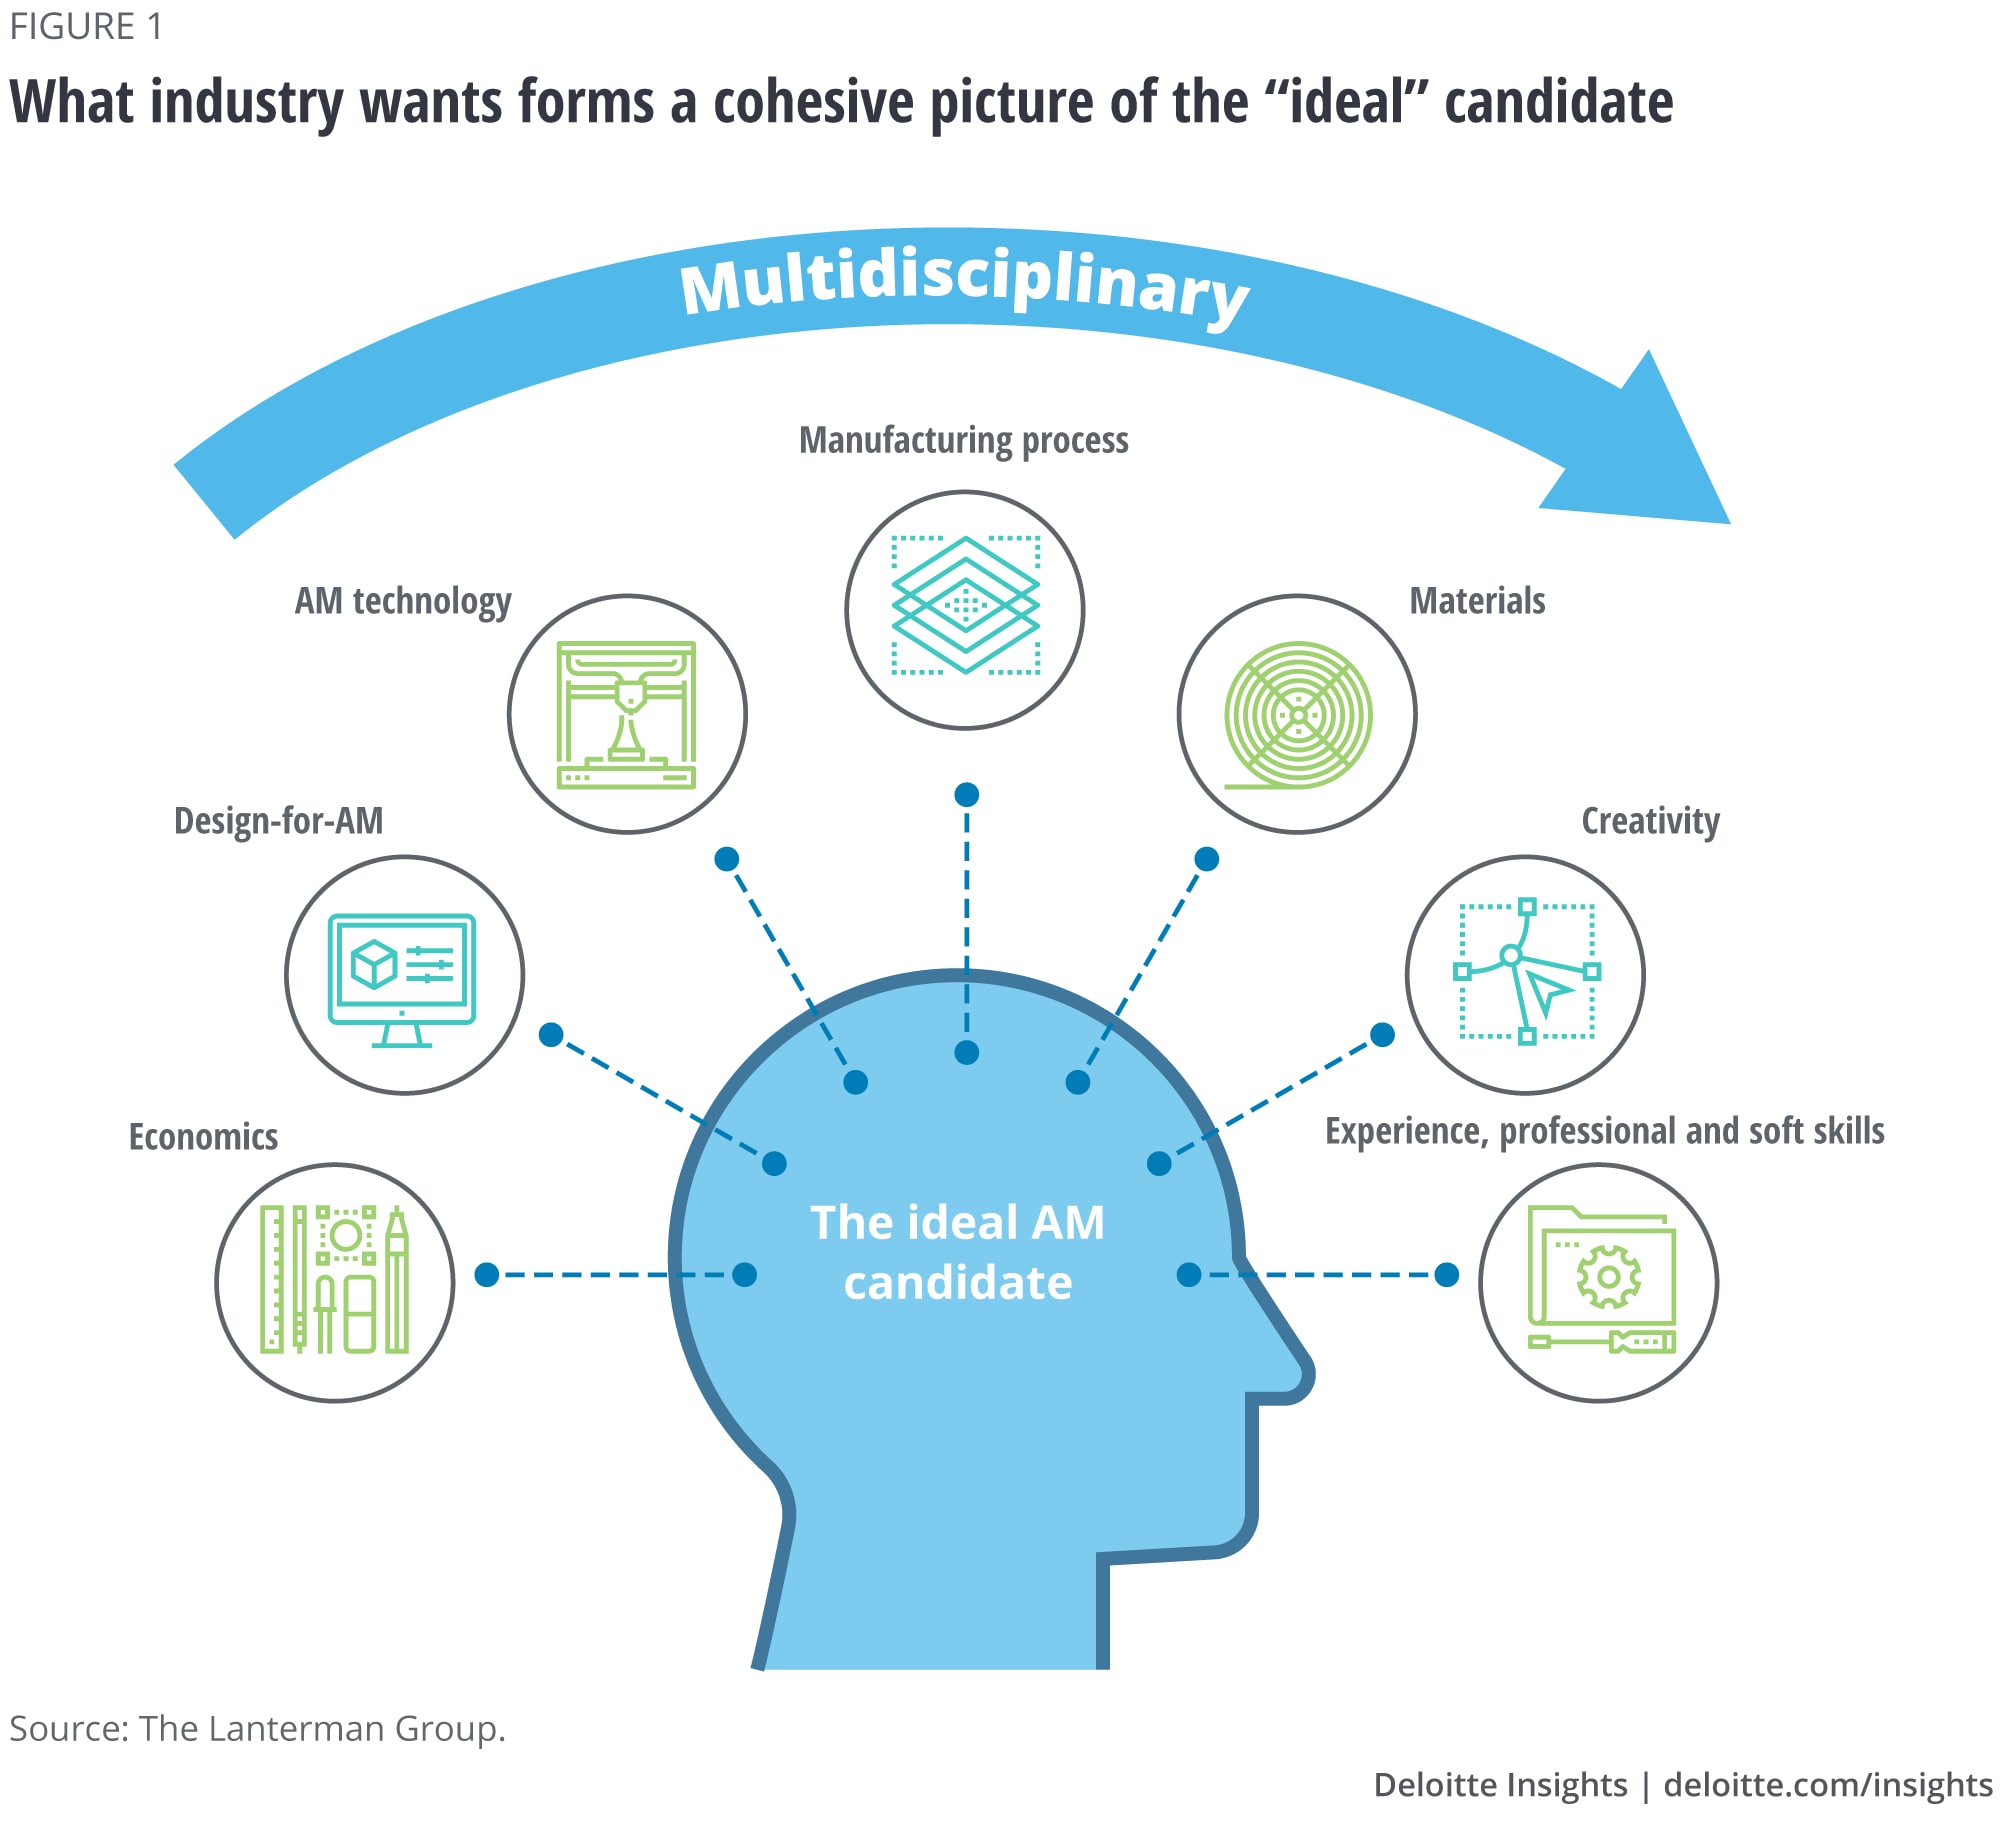 What industry wants forms a cohesive picture of the “ideal” candidate